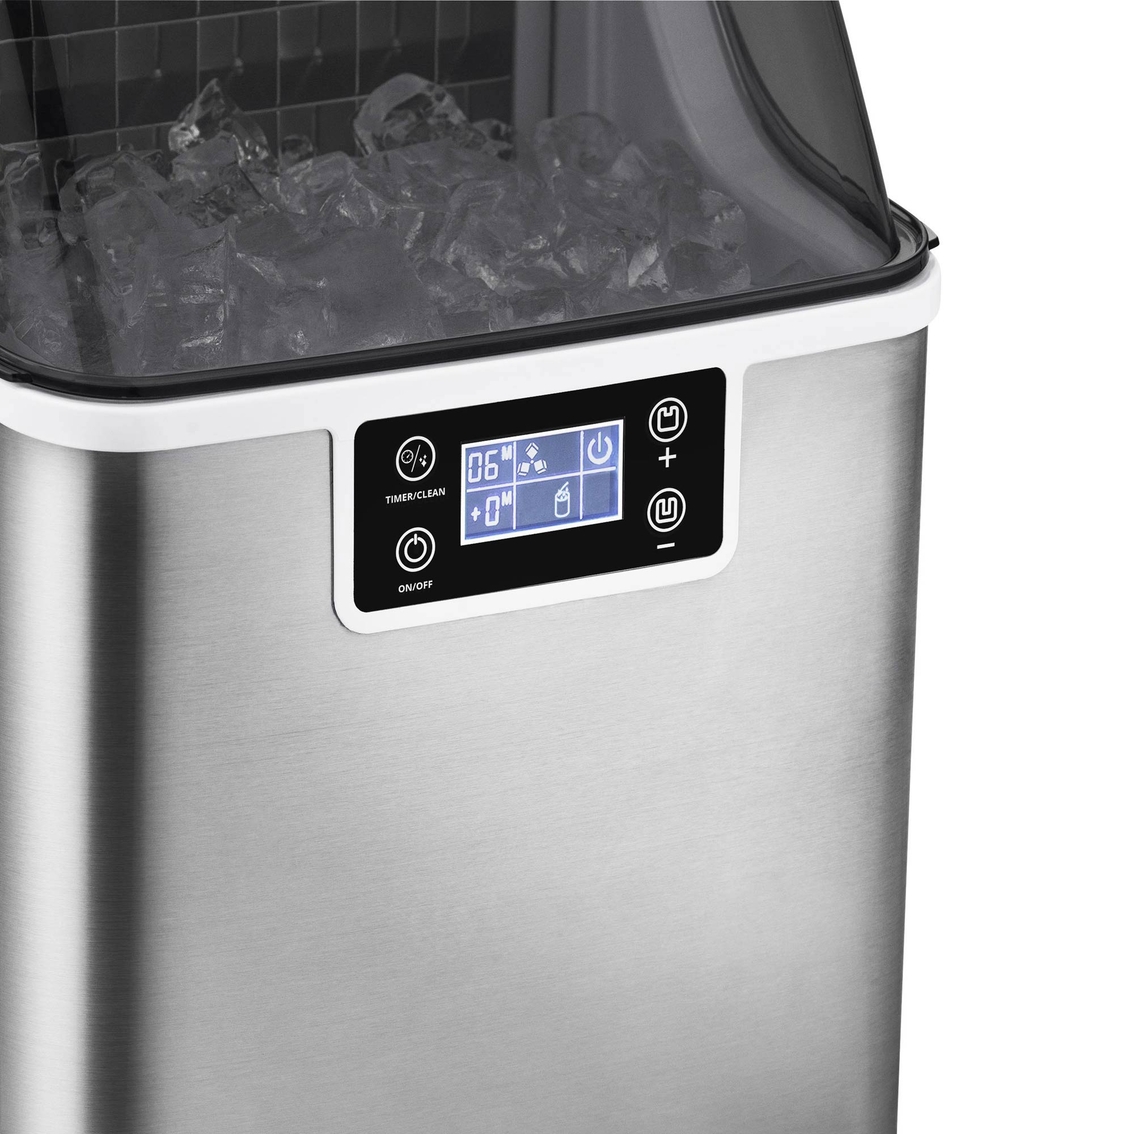 New Air LLC 45 lb. Clear Ice Maker - Image 5 of 10